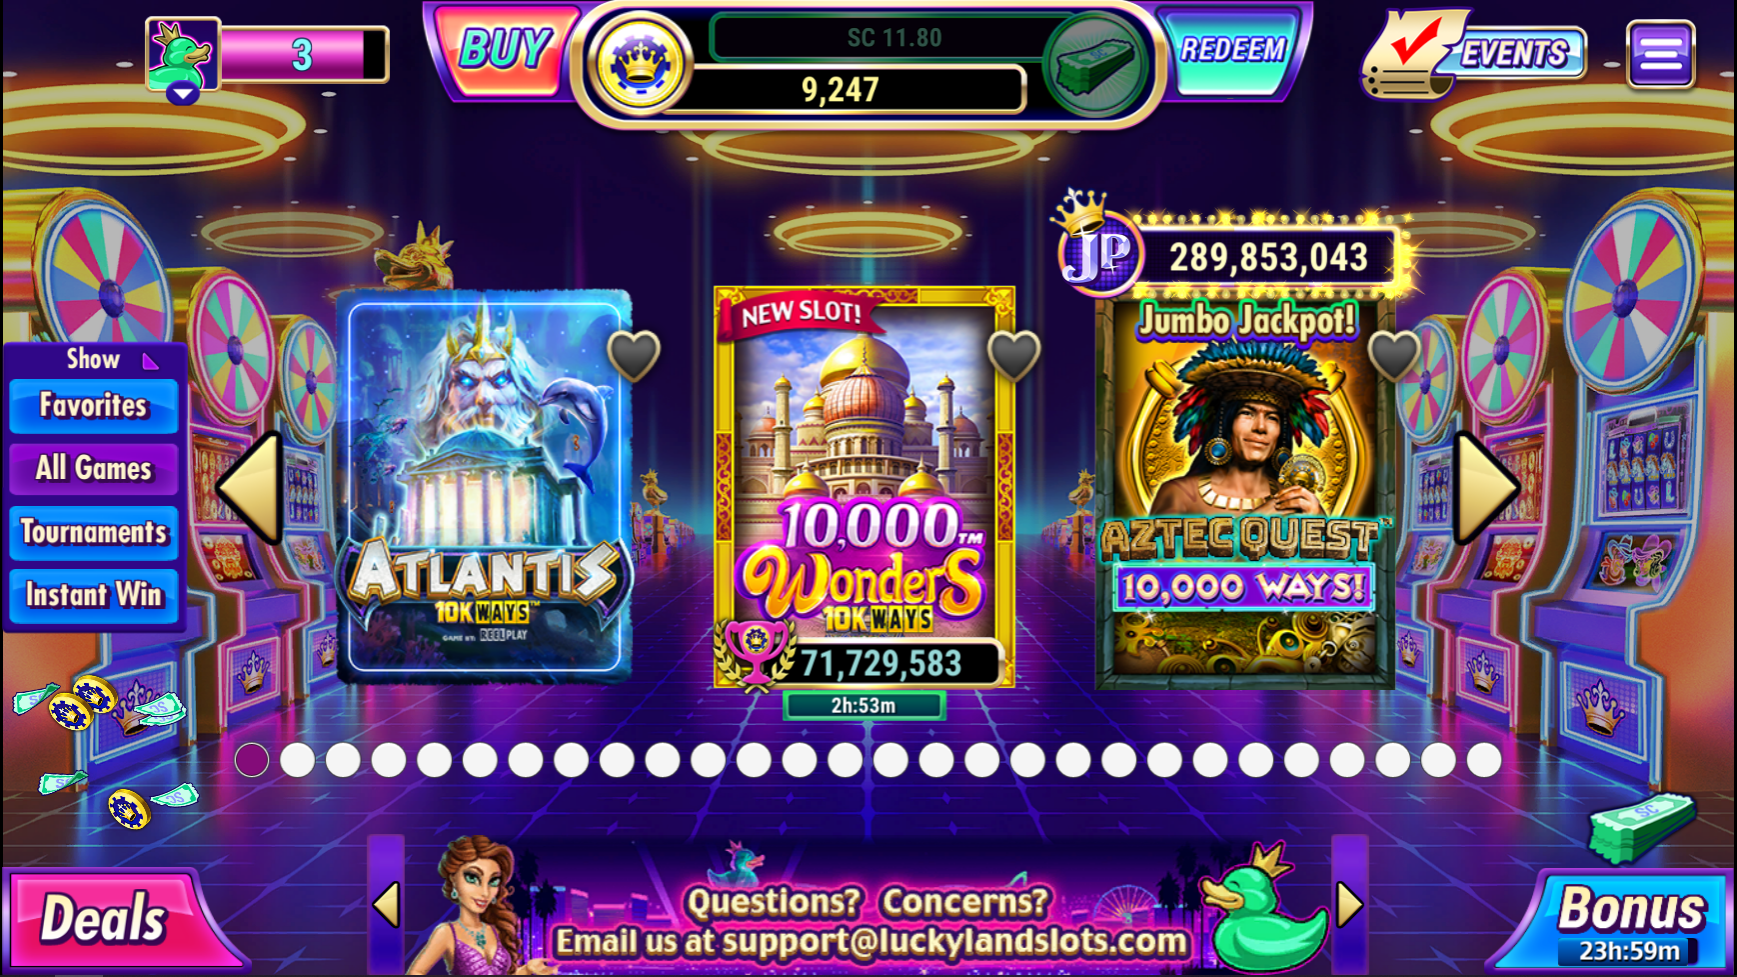 20 Places To Get Deals On Best Online Casinos